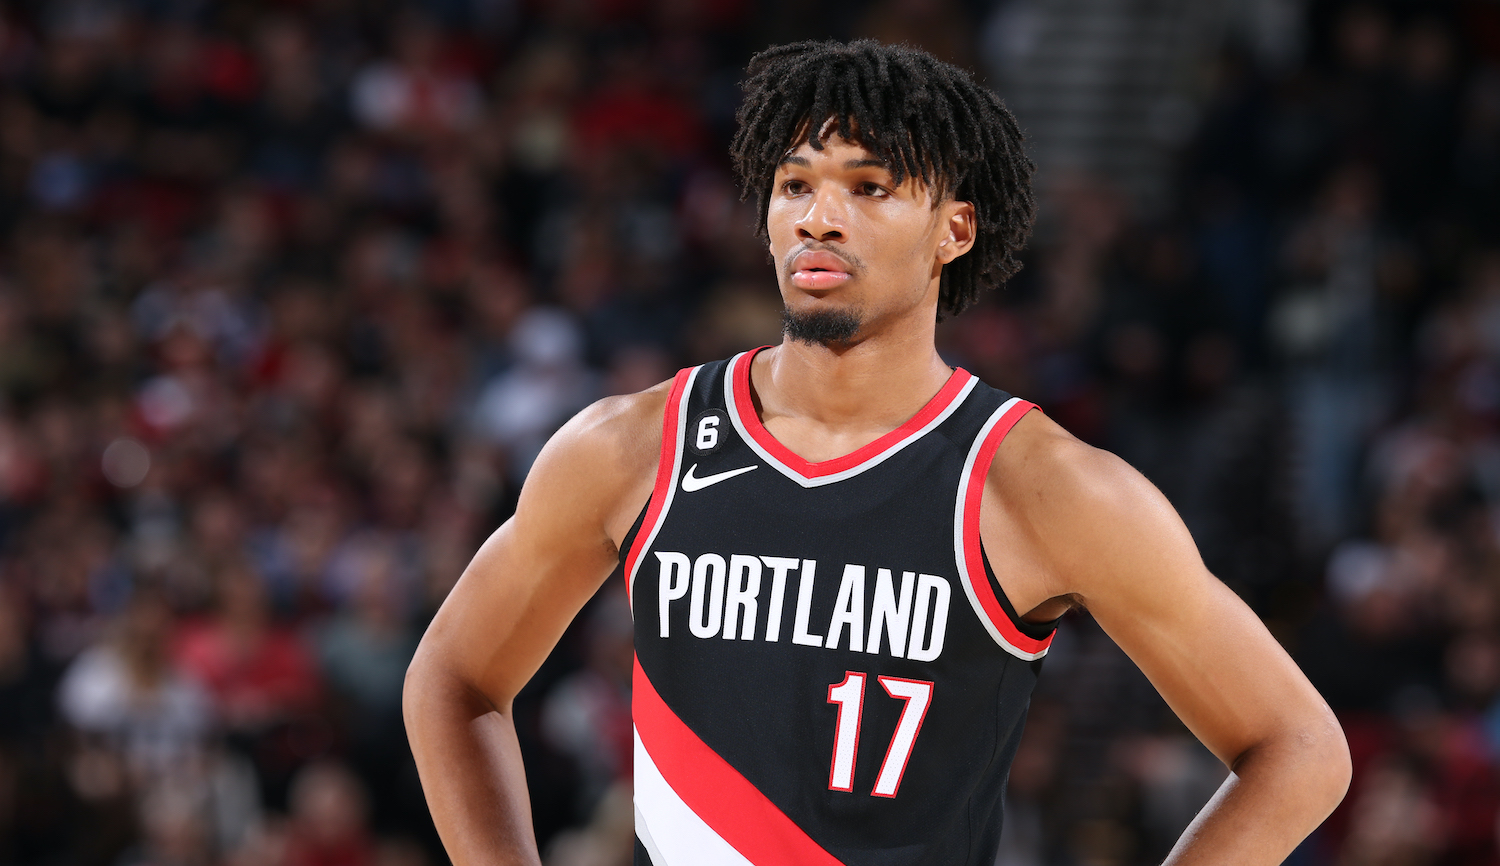 PORTLAND, OR - OCTOBER 26: Shaedon Sharpe #17 of the Portland Trail Blazers looks on during the game against the Miami Heat on October 26, 2022 at the Moda Center Arena in Portland, Oregon. NOTE TO USER: User expressly acknowledges and agrees that, by downloading and or using this photograph, user is consenting to the terms and conditions of the Getty Images License Agreement. Mandatory Copyright Notice: Copyright 2022 NBAE (Photo by Sam Forencich/NBAE via Getty Images)